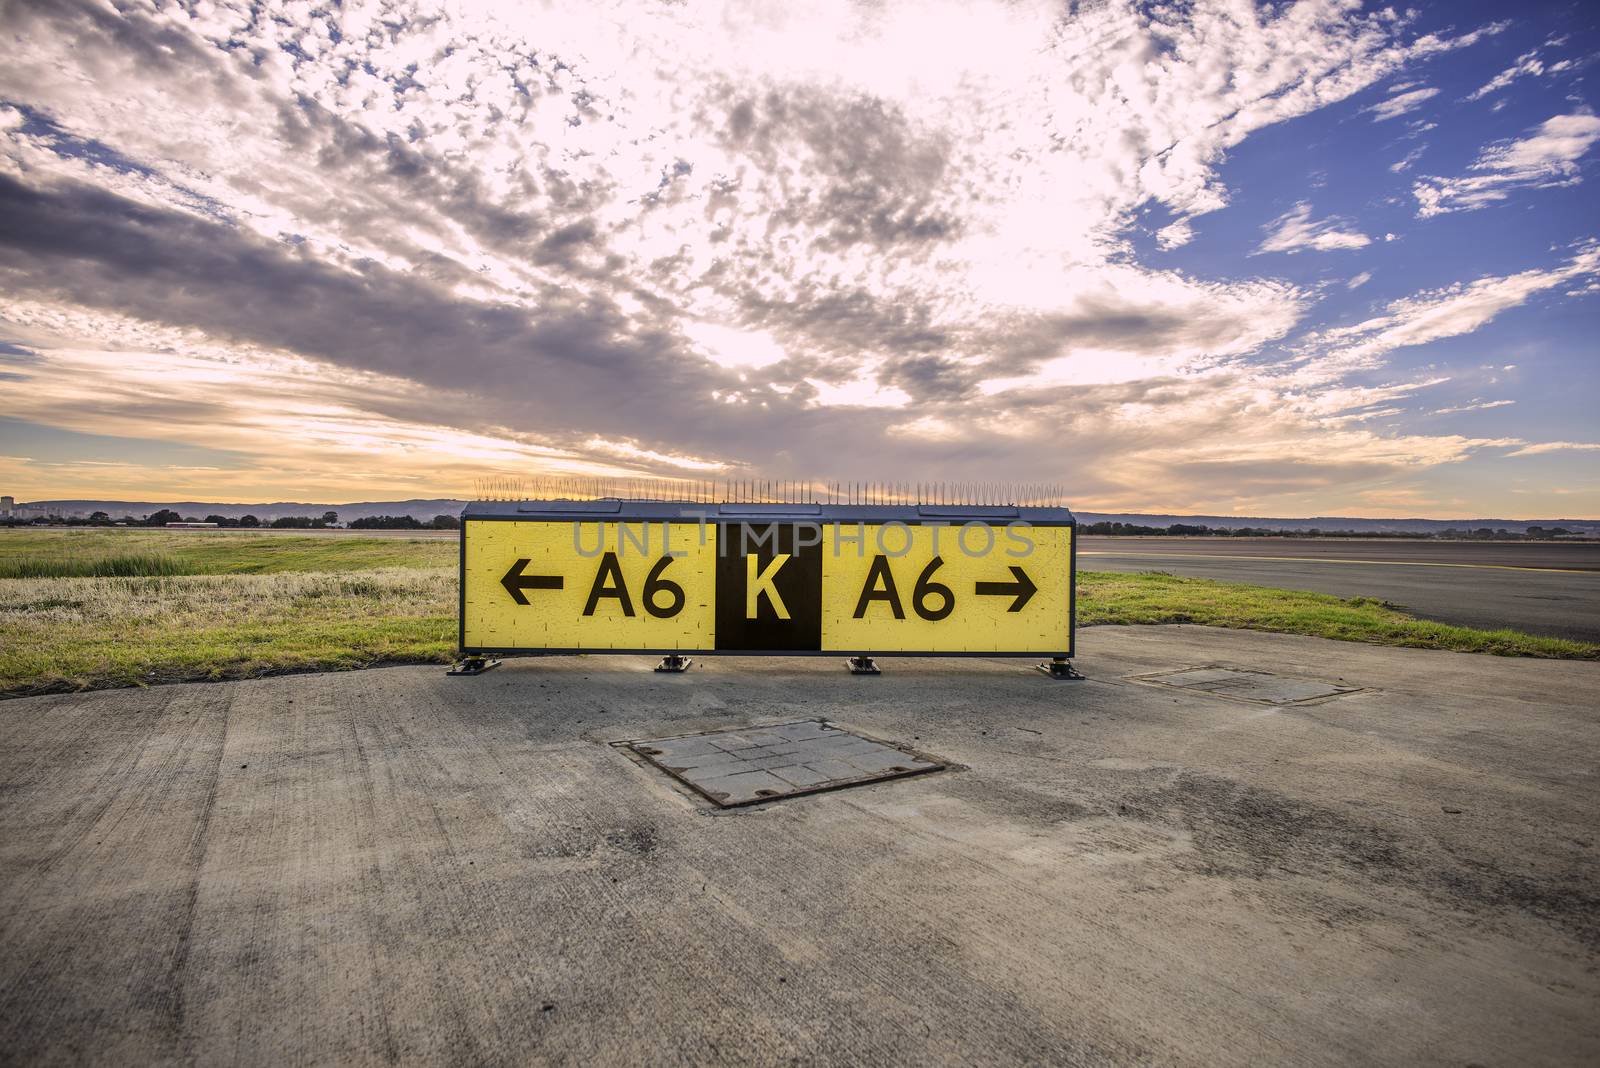 Signs at the airport guiding pilots to the runway